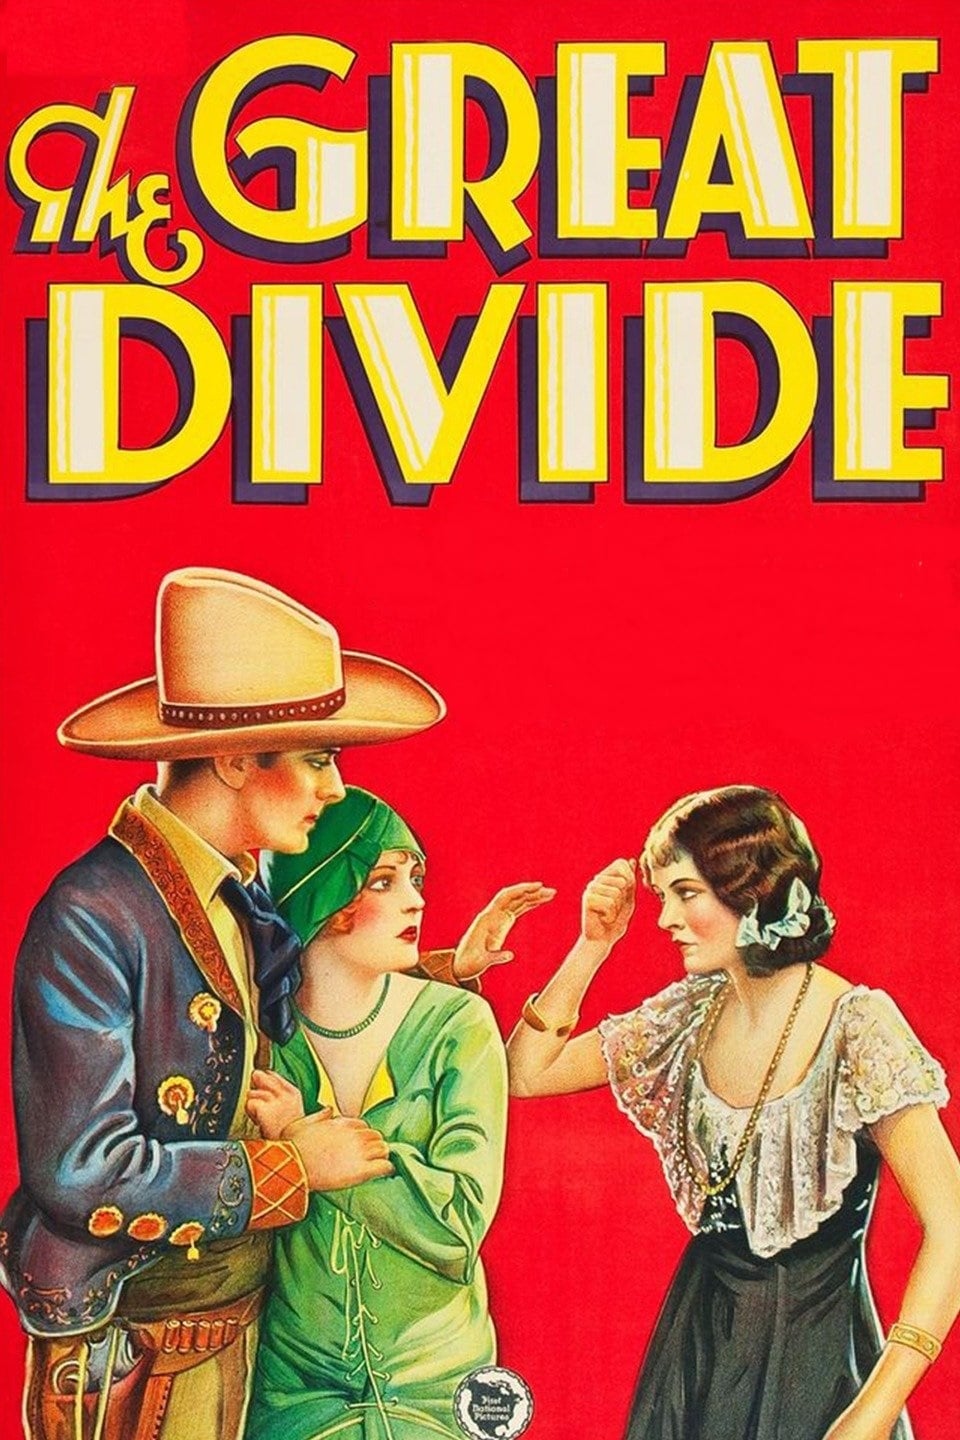 The Great Divide